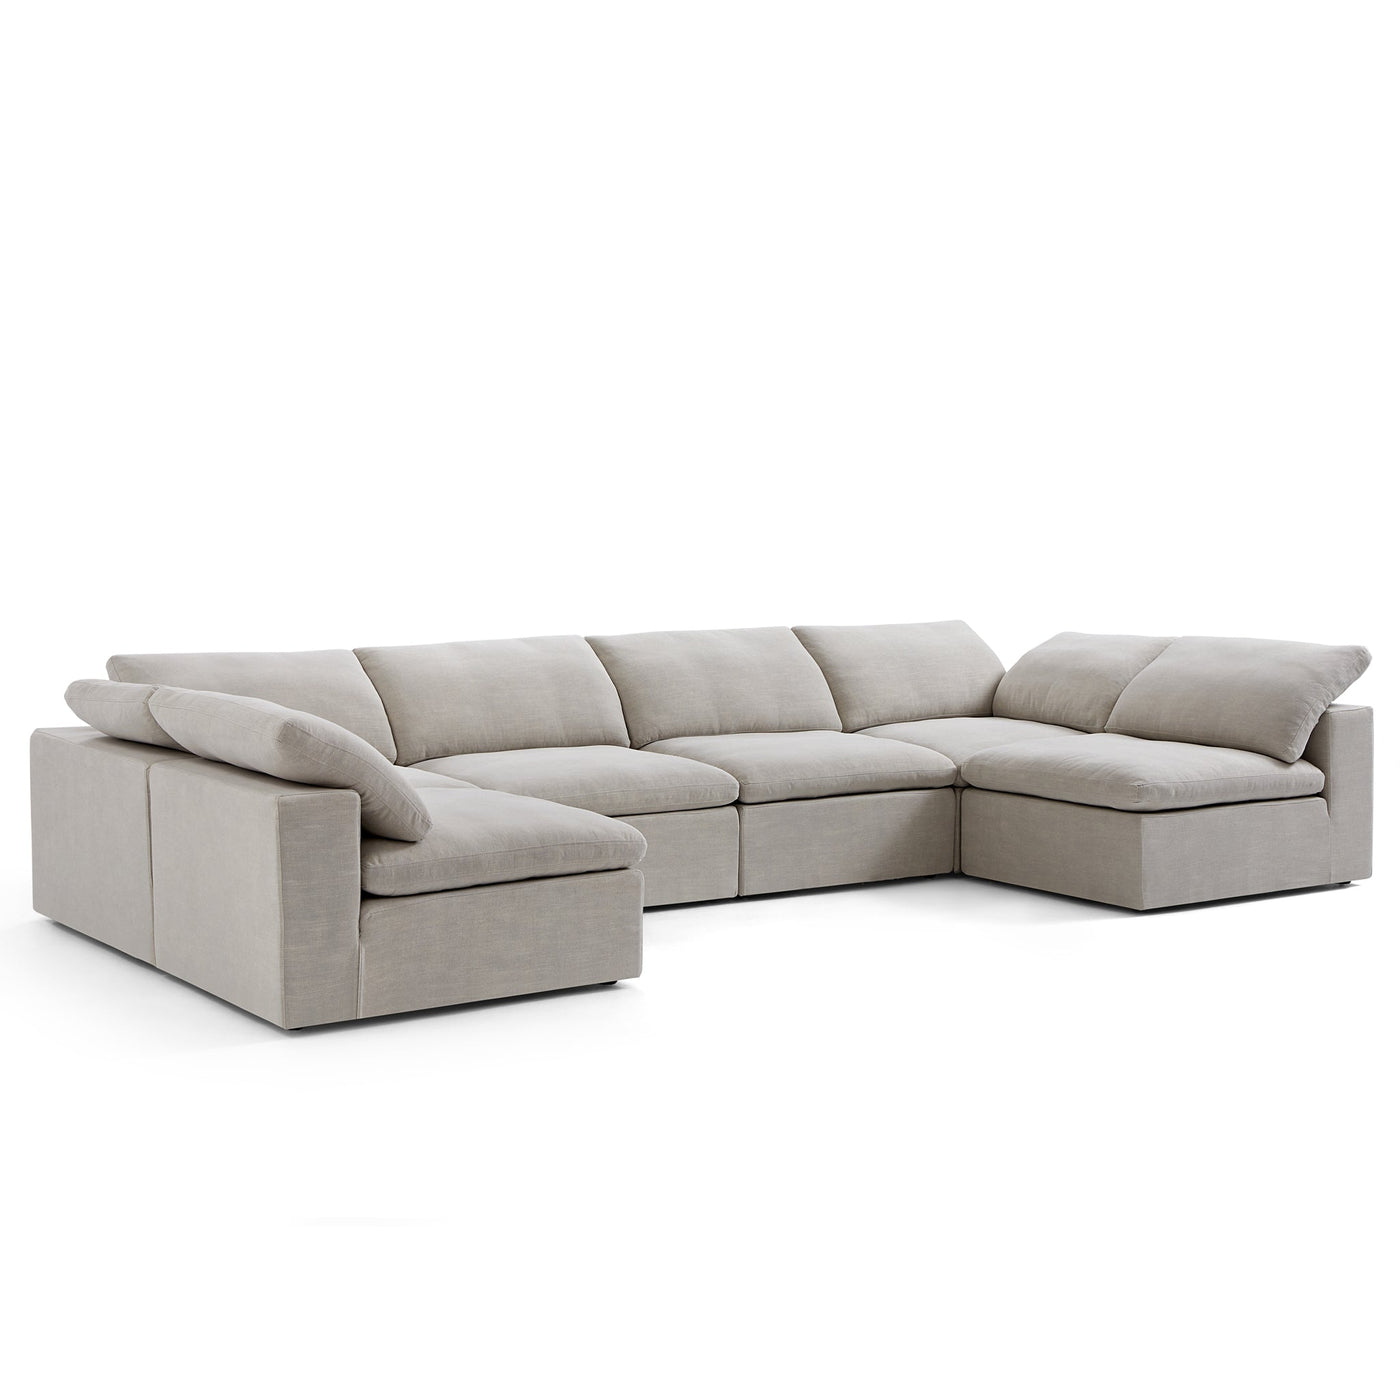 Tender Wabi Sabi Sand U Shaped Sectional with Open Ends-Sand-165.4"